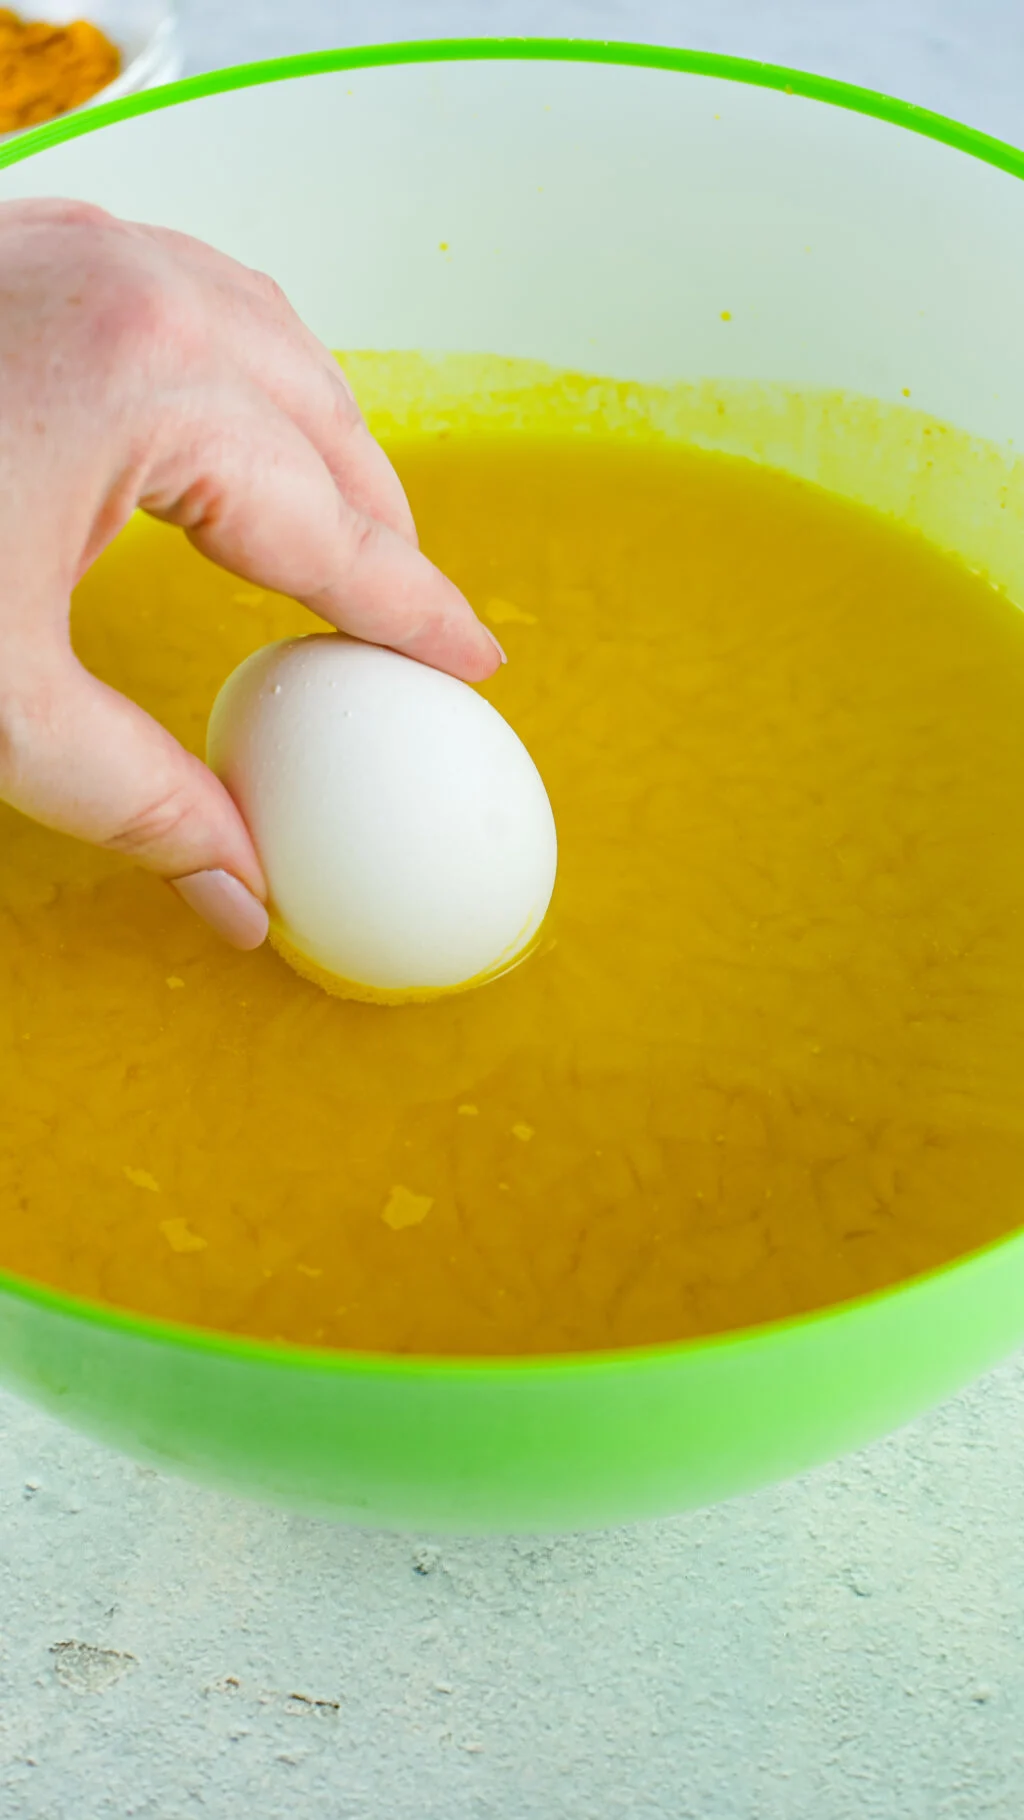 woman's hand placing a hard boiled egg inside a turmeric water bowl